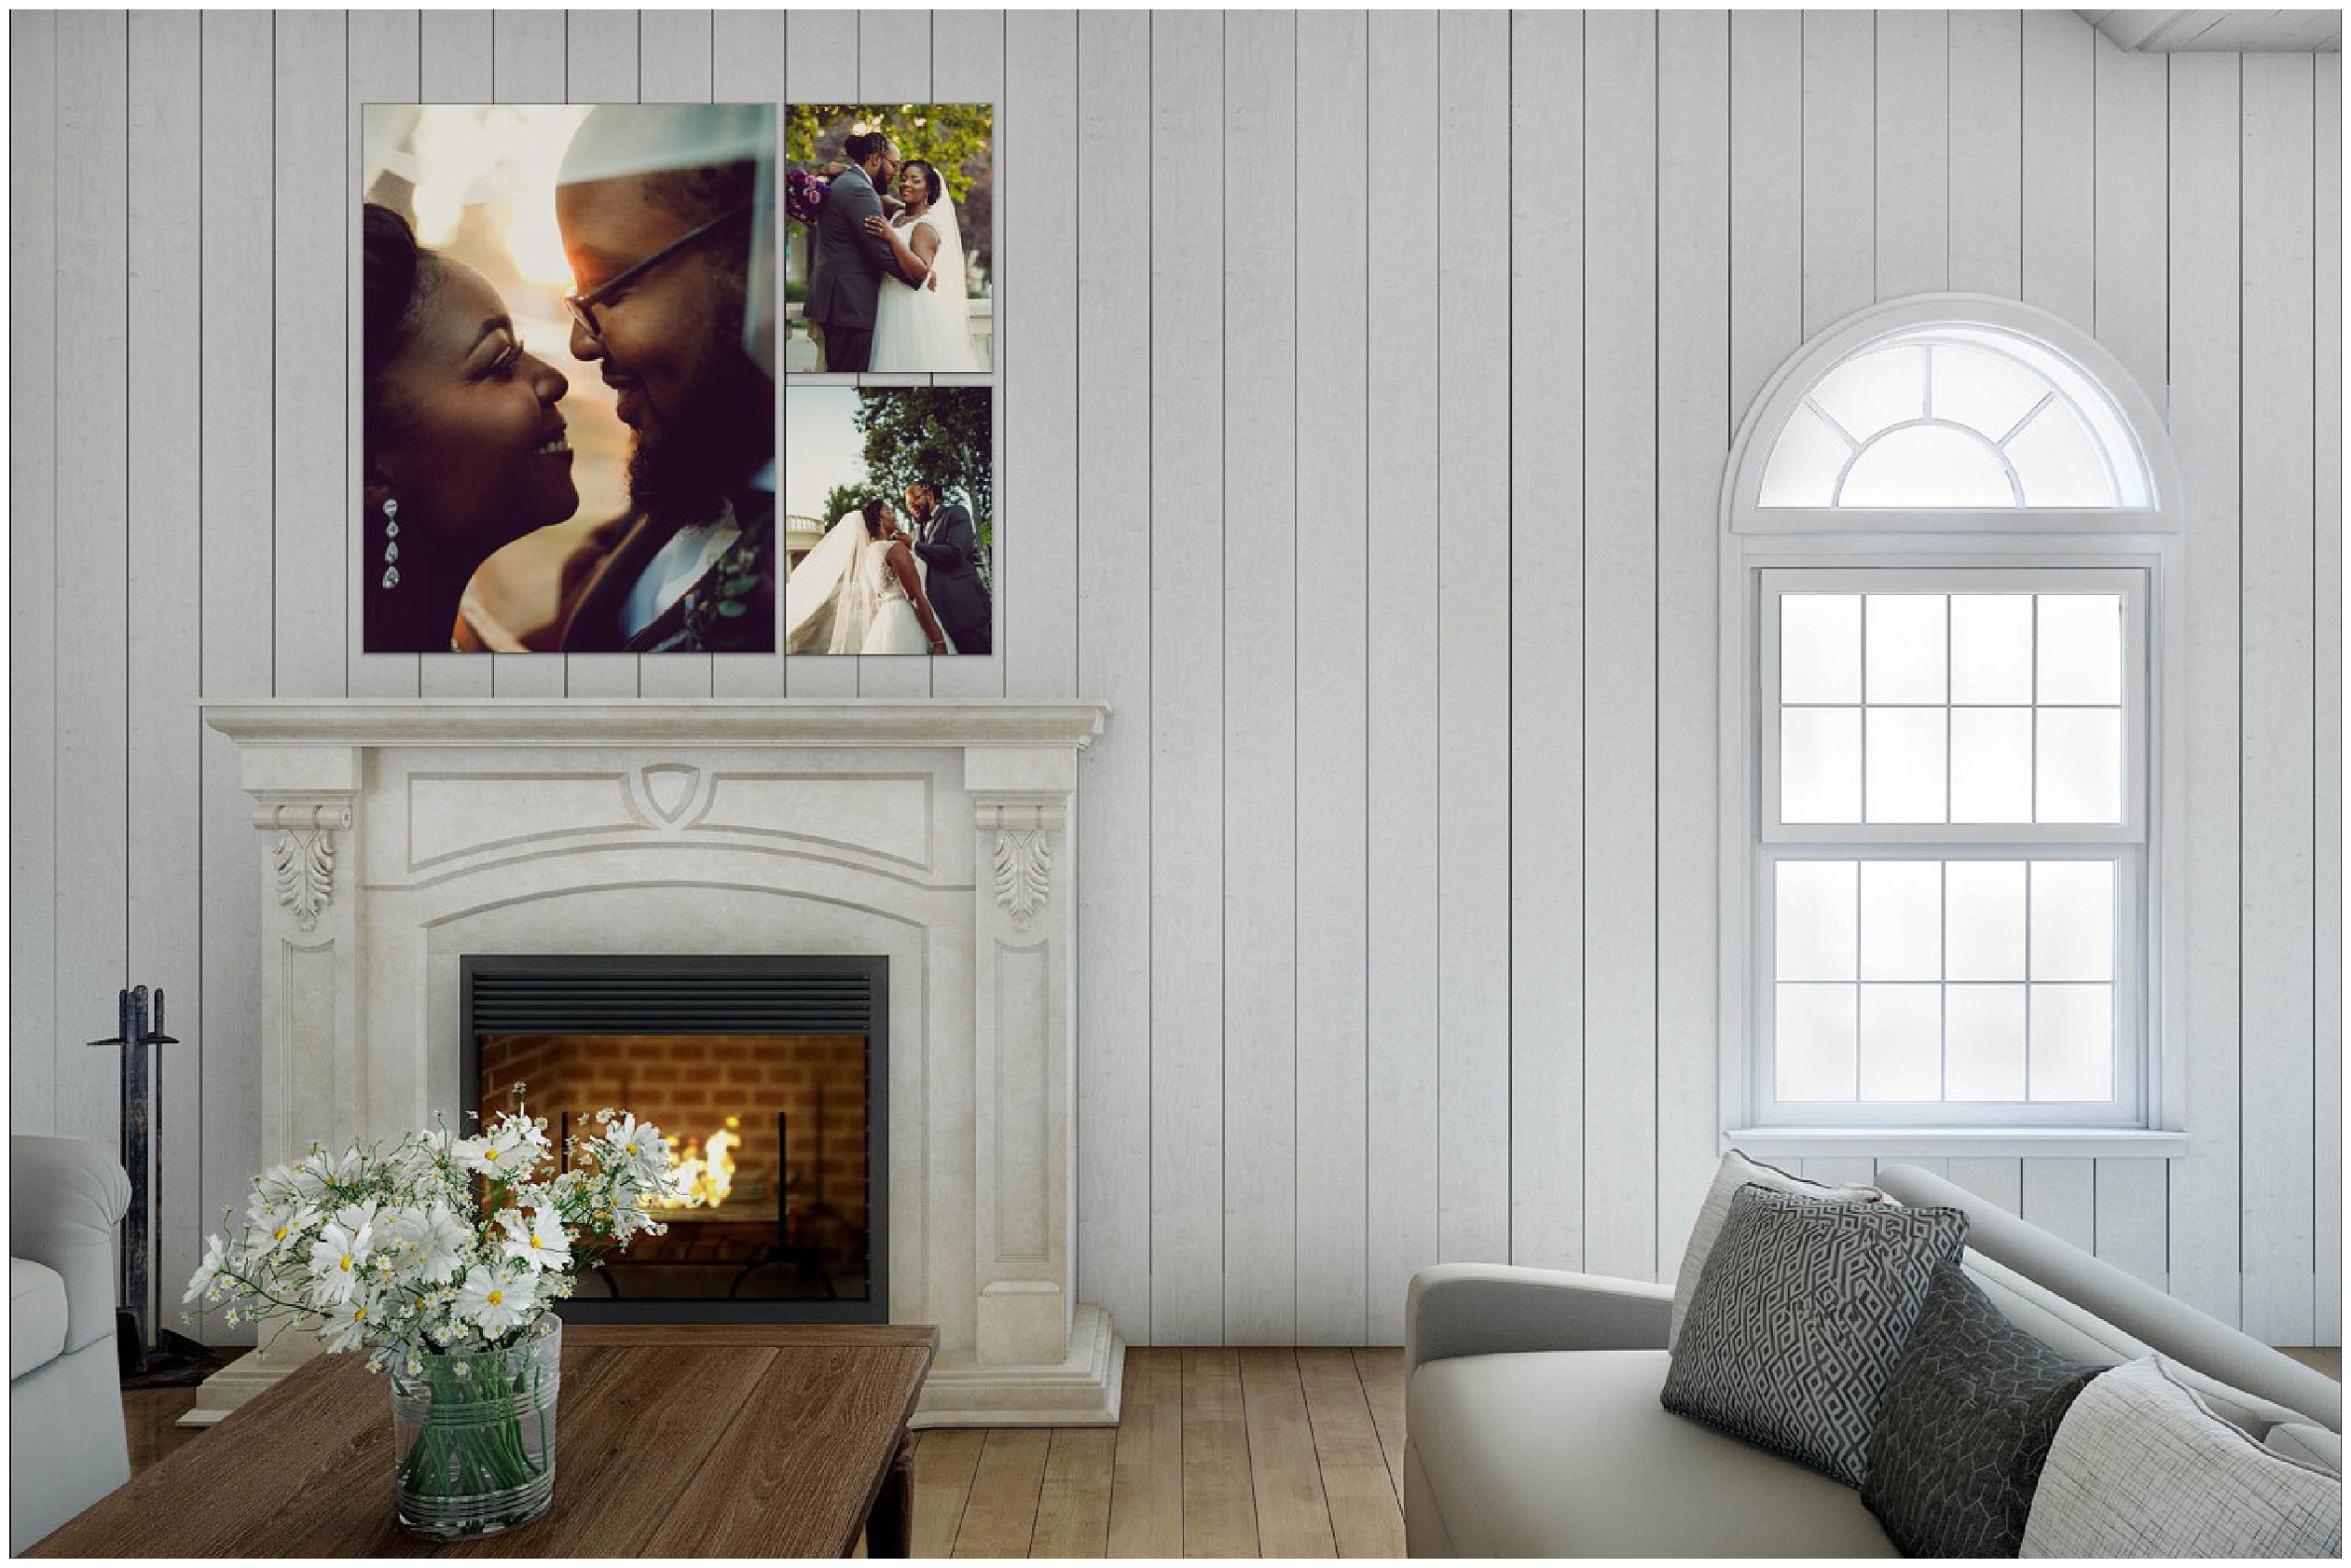 Wedding artwork, bride and groom canvas prints over fireplace
